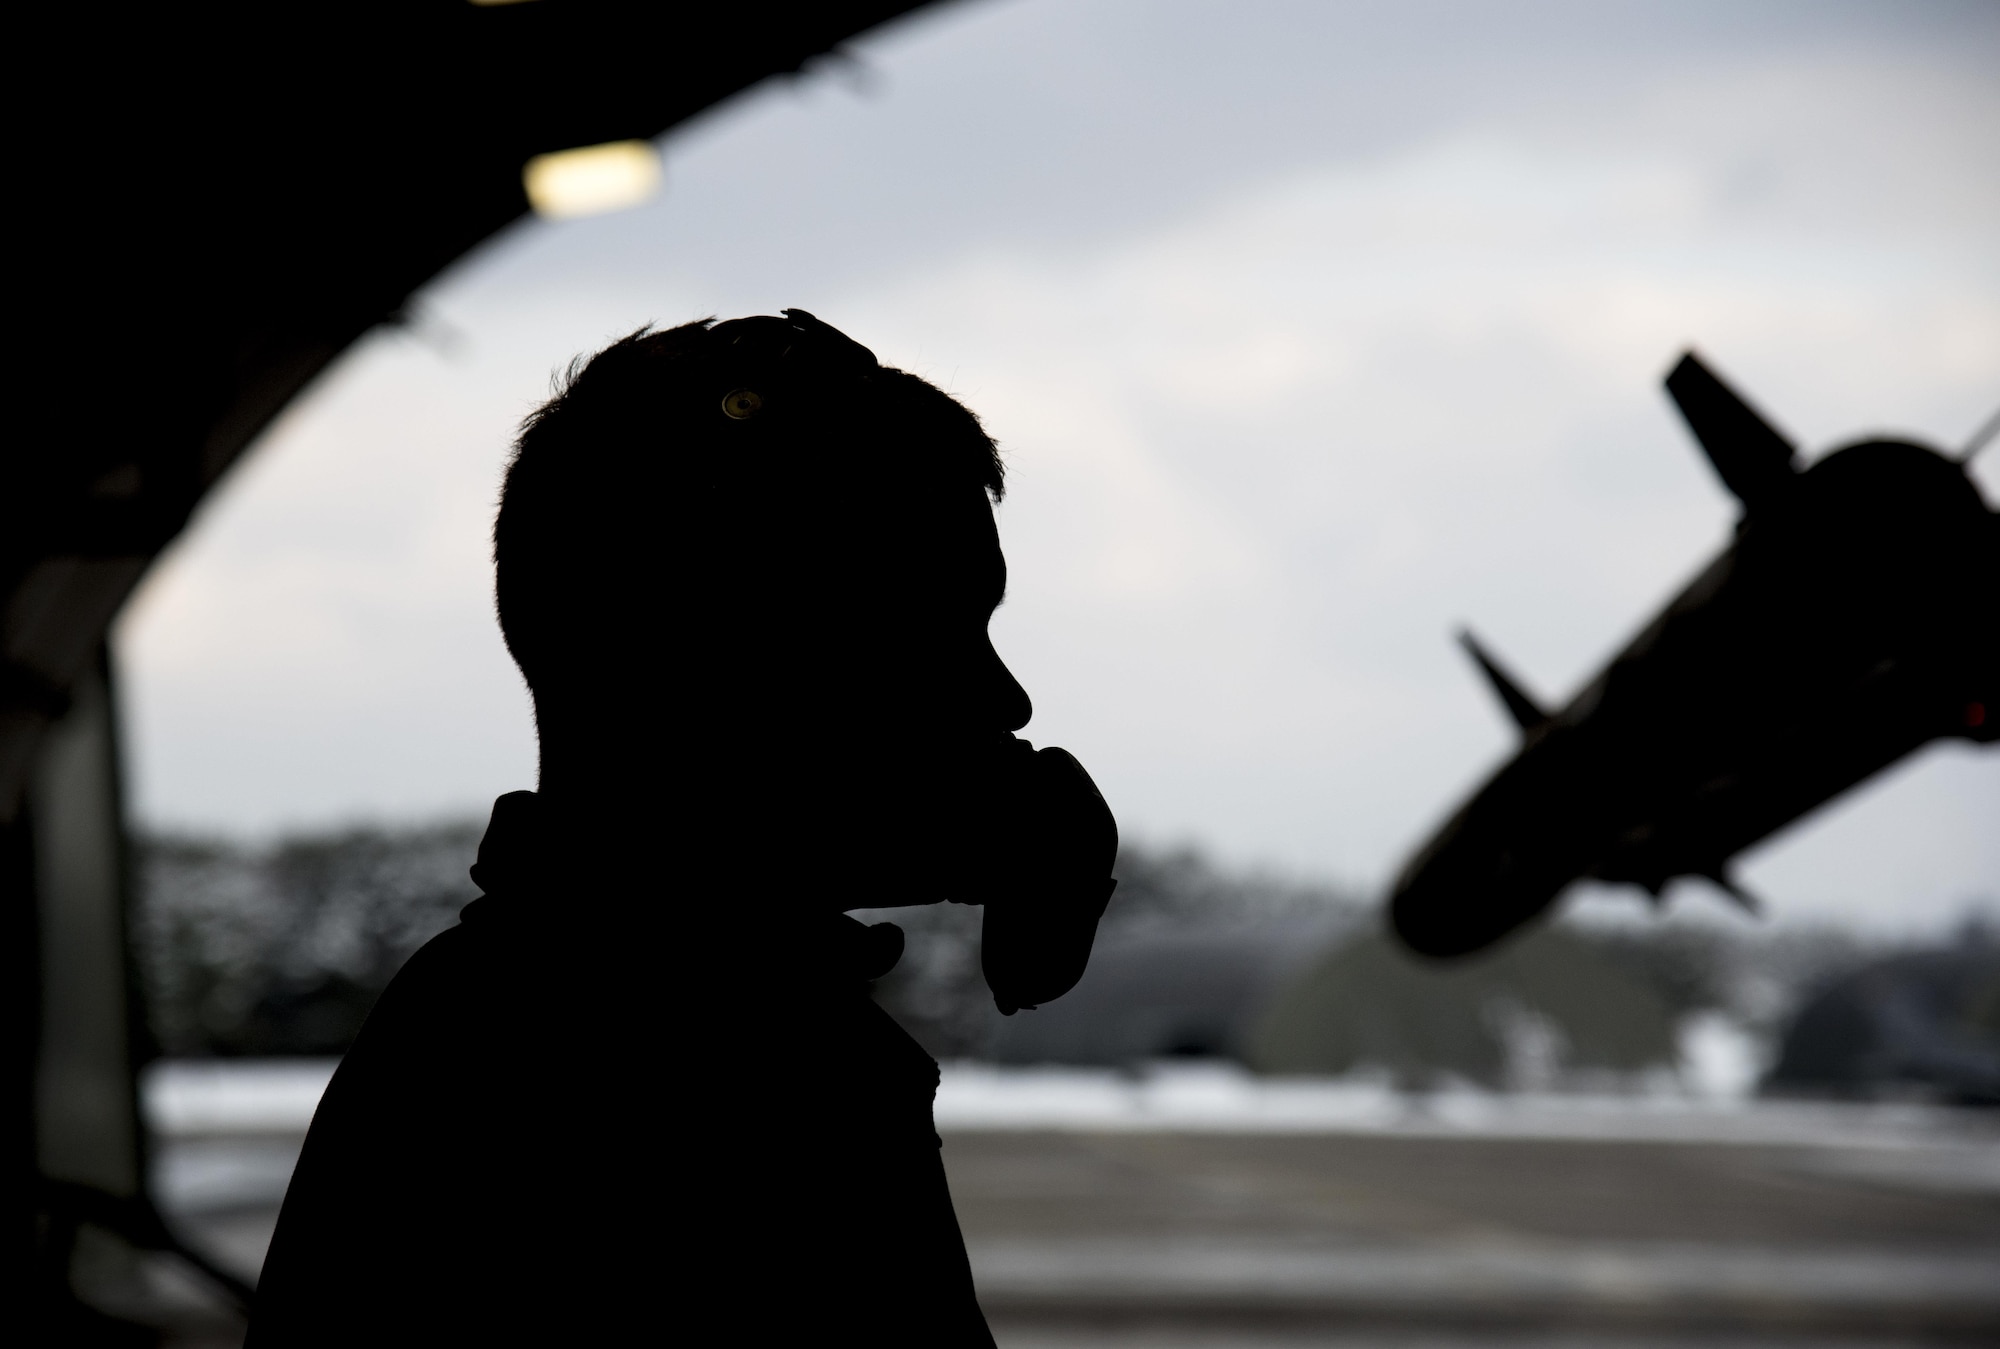 U.S. Air Force Airman 1st Class Patrick O'Connell, a 35th Maintenance Squadron crew chief, checks flight controls during exercise Keen Sword 17, at Misawa Air Base, Japan, Nov. 10, 2016. Exercises like Keen Sword are a decisive demonstration of the strength of the friendship between the people, and provide an indispensible field training environment for enhancing mutual understanding of each country's tactics, communication protocols, procedutres and general interoperability. (U.S. Air Force photo by Airman 1st Class Sadie Colbert)